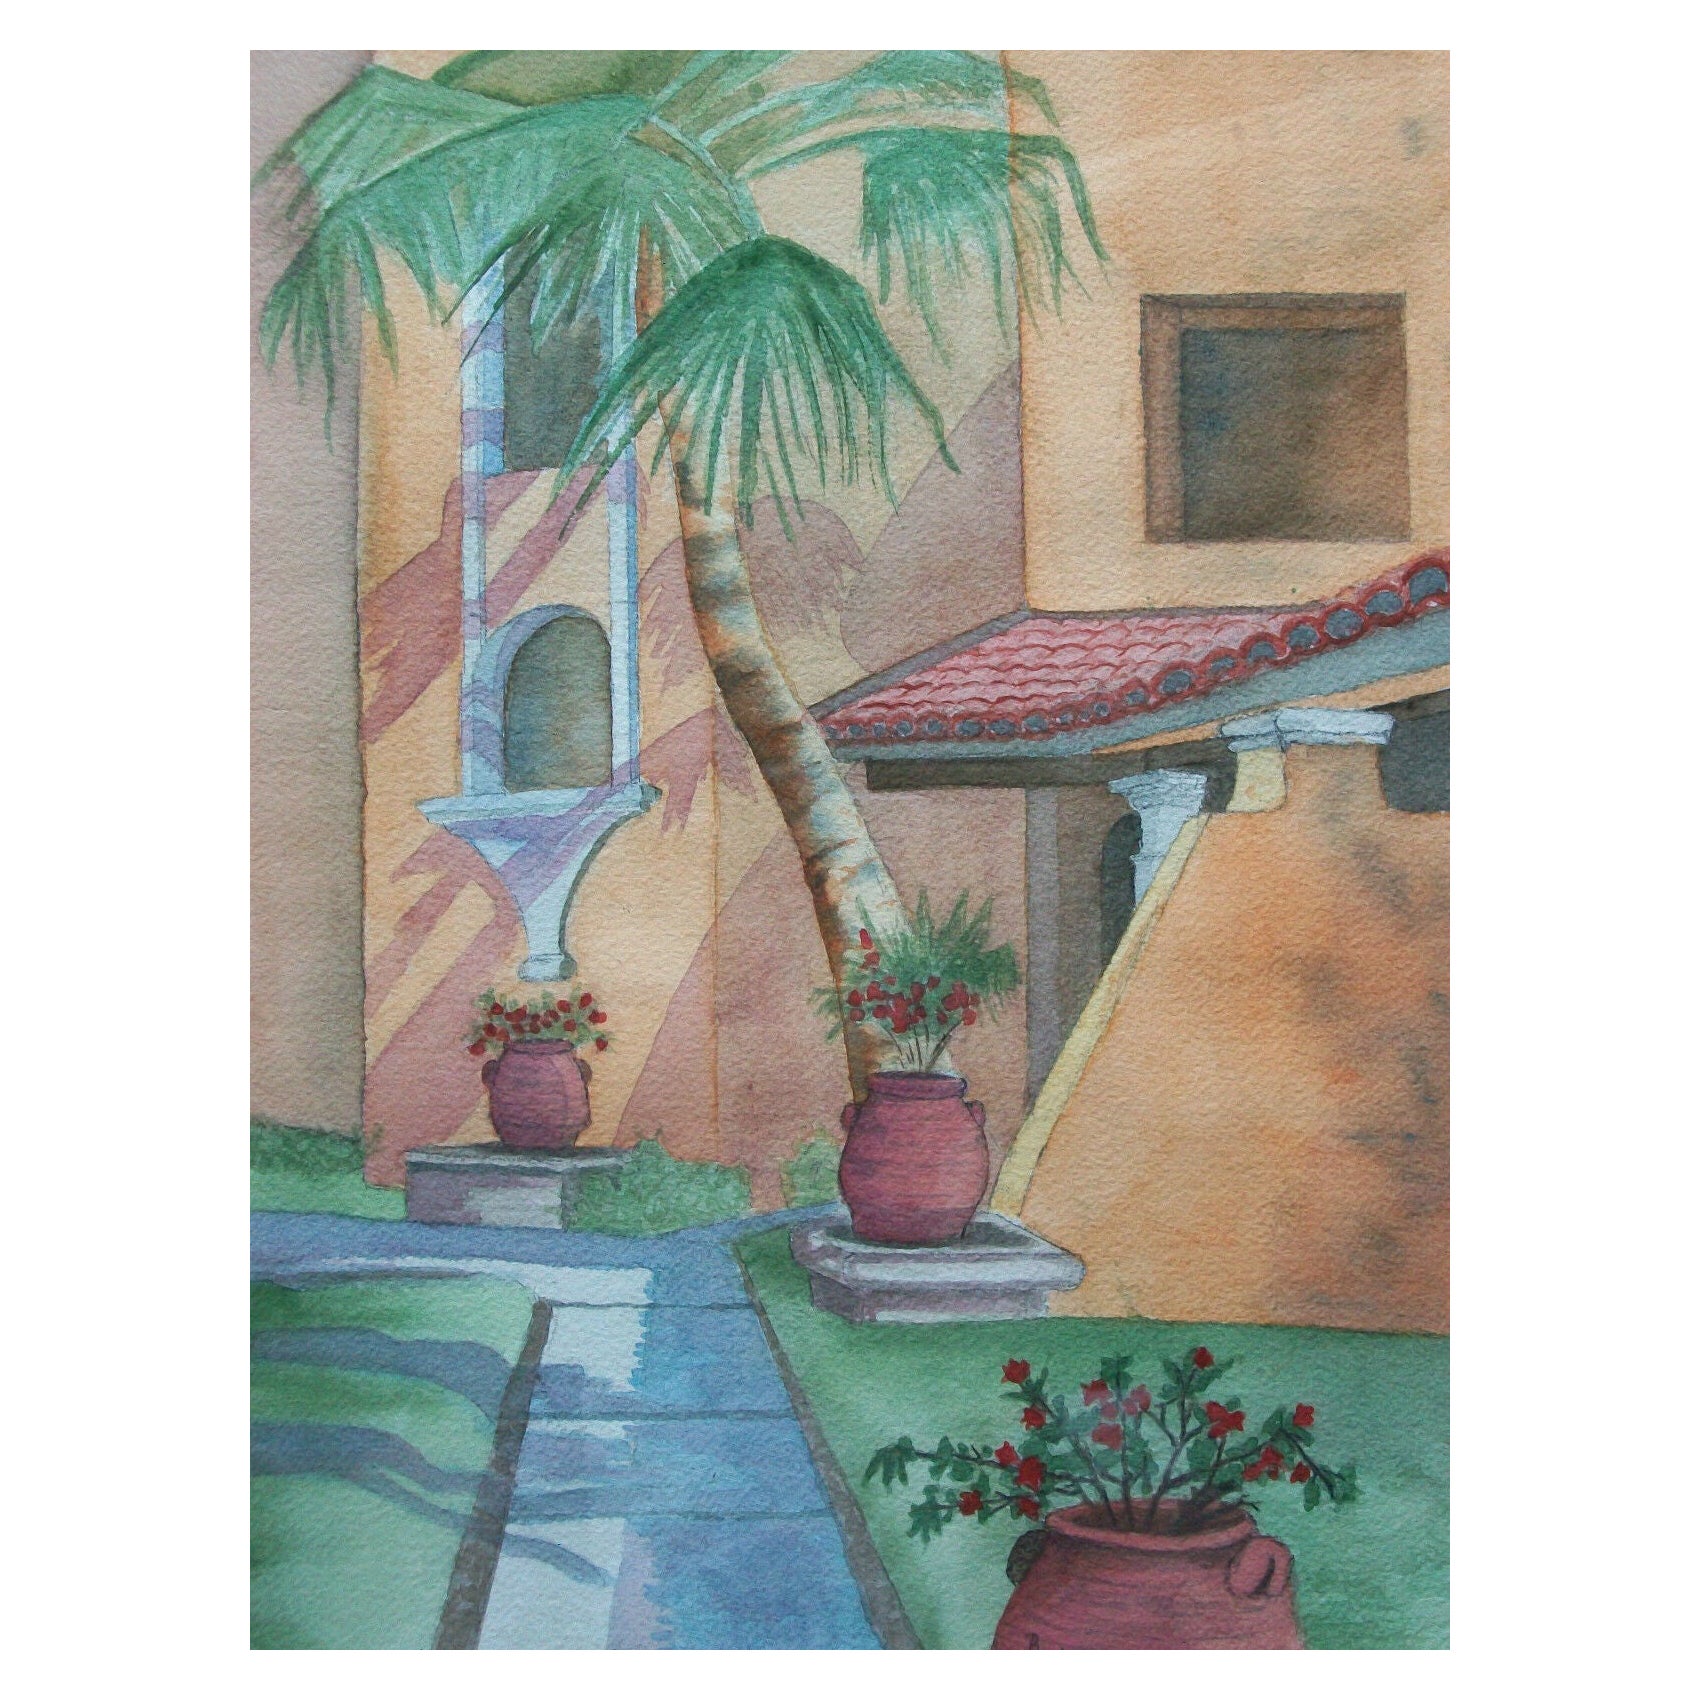 B. McKay, 'La Jolla', Framed Watercolor Painting, Signed & Dated, circa 2000